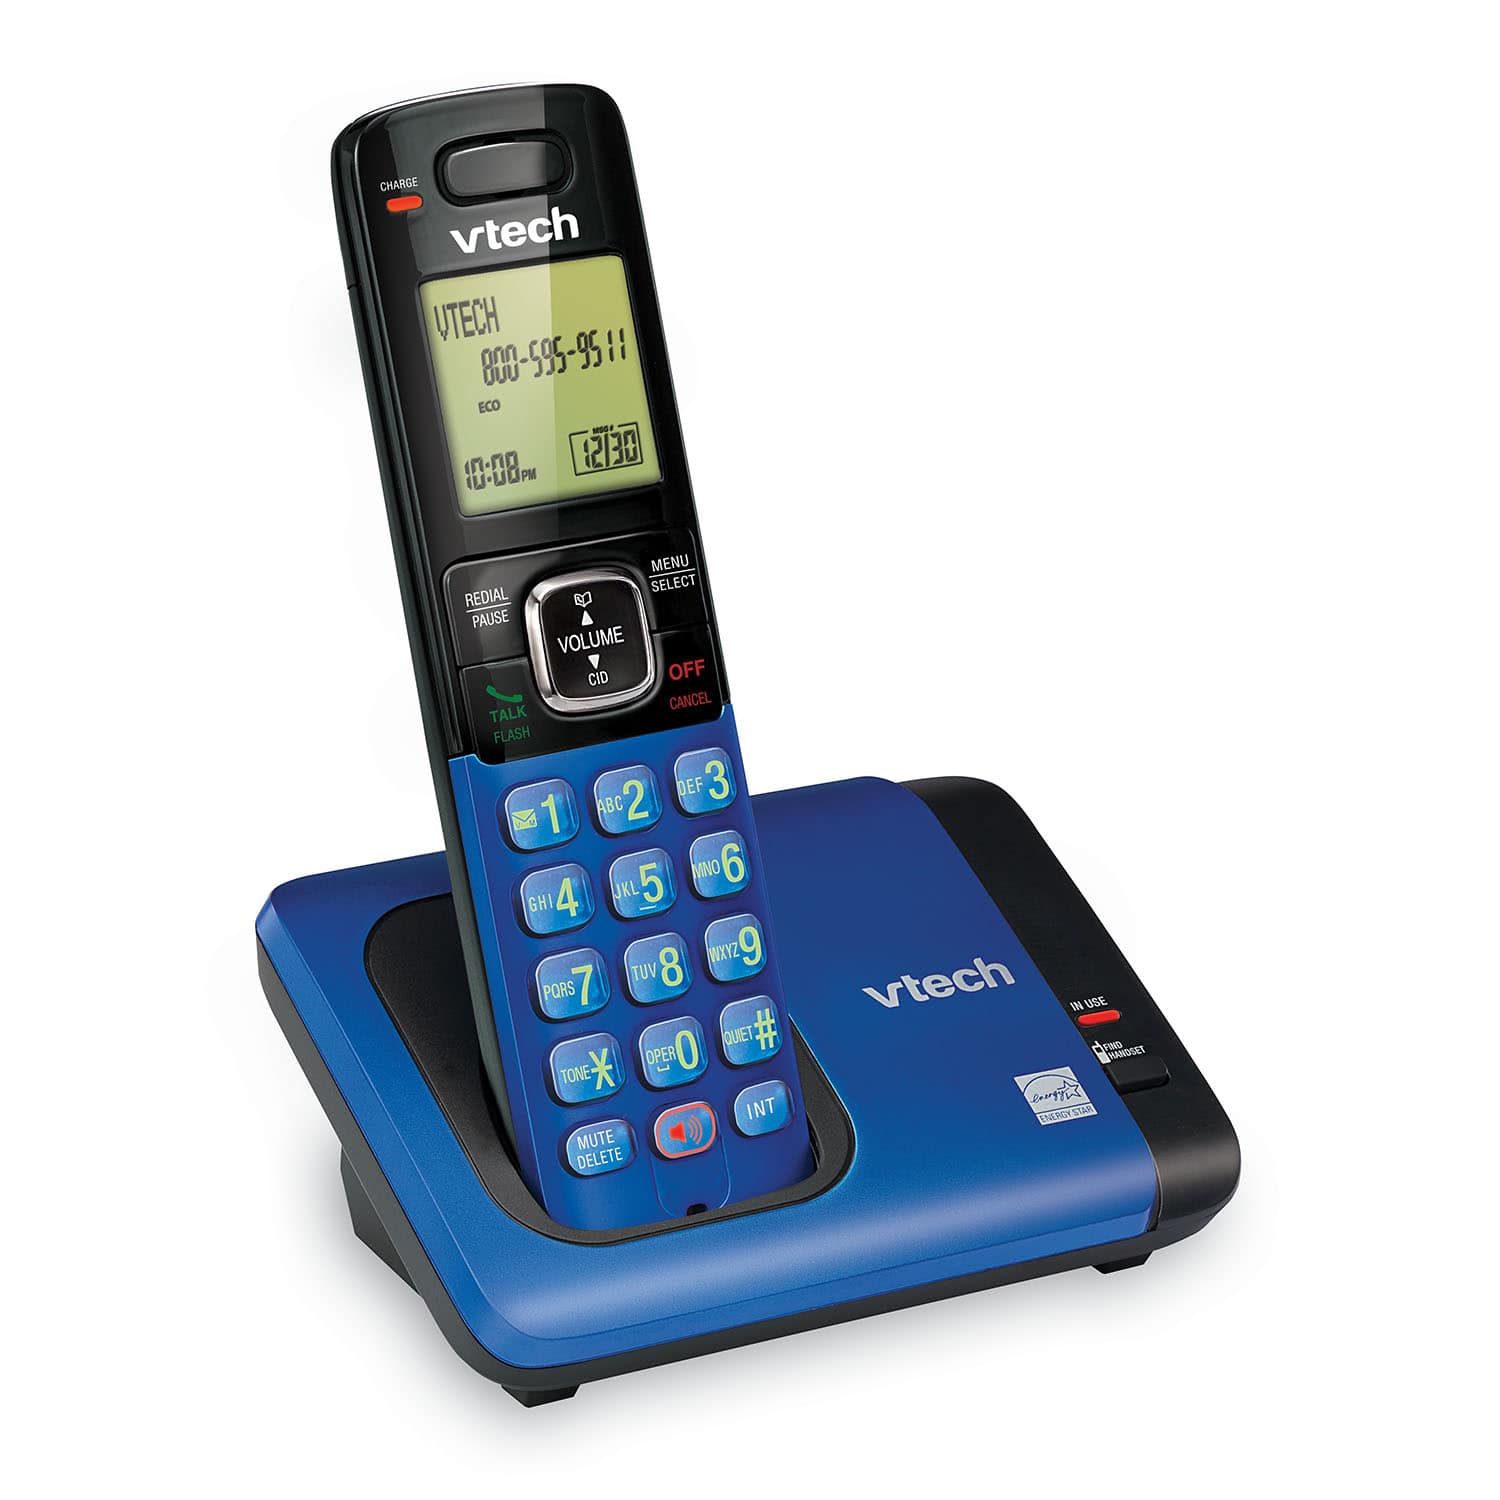 VTech CS6719 Cordless Phone with Caller ID/Call Waiting DECT 6.0 